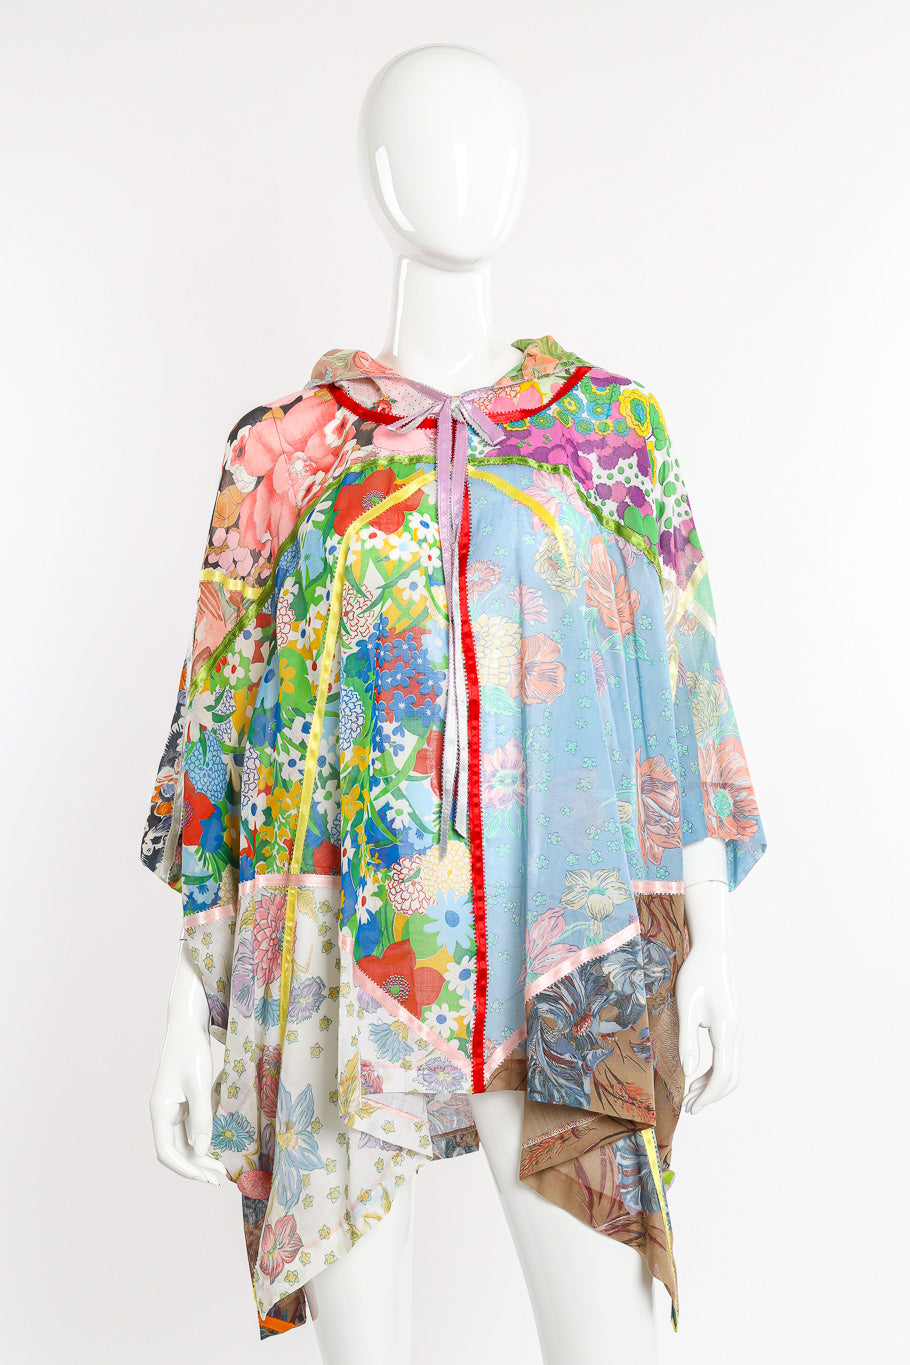 Vintage The French Clique Hooded Floral Patchwork Poncho II front view on mannequin @Recessla